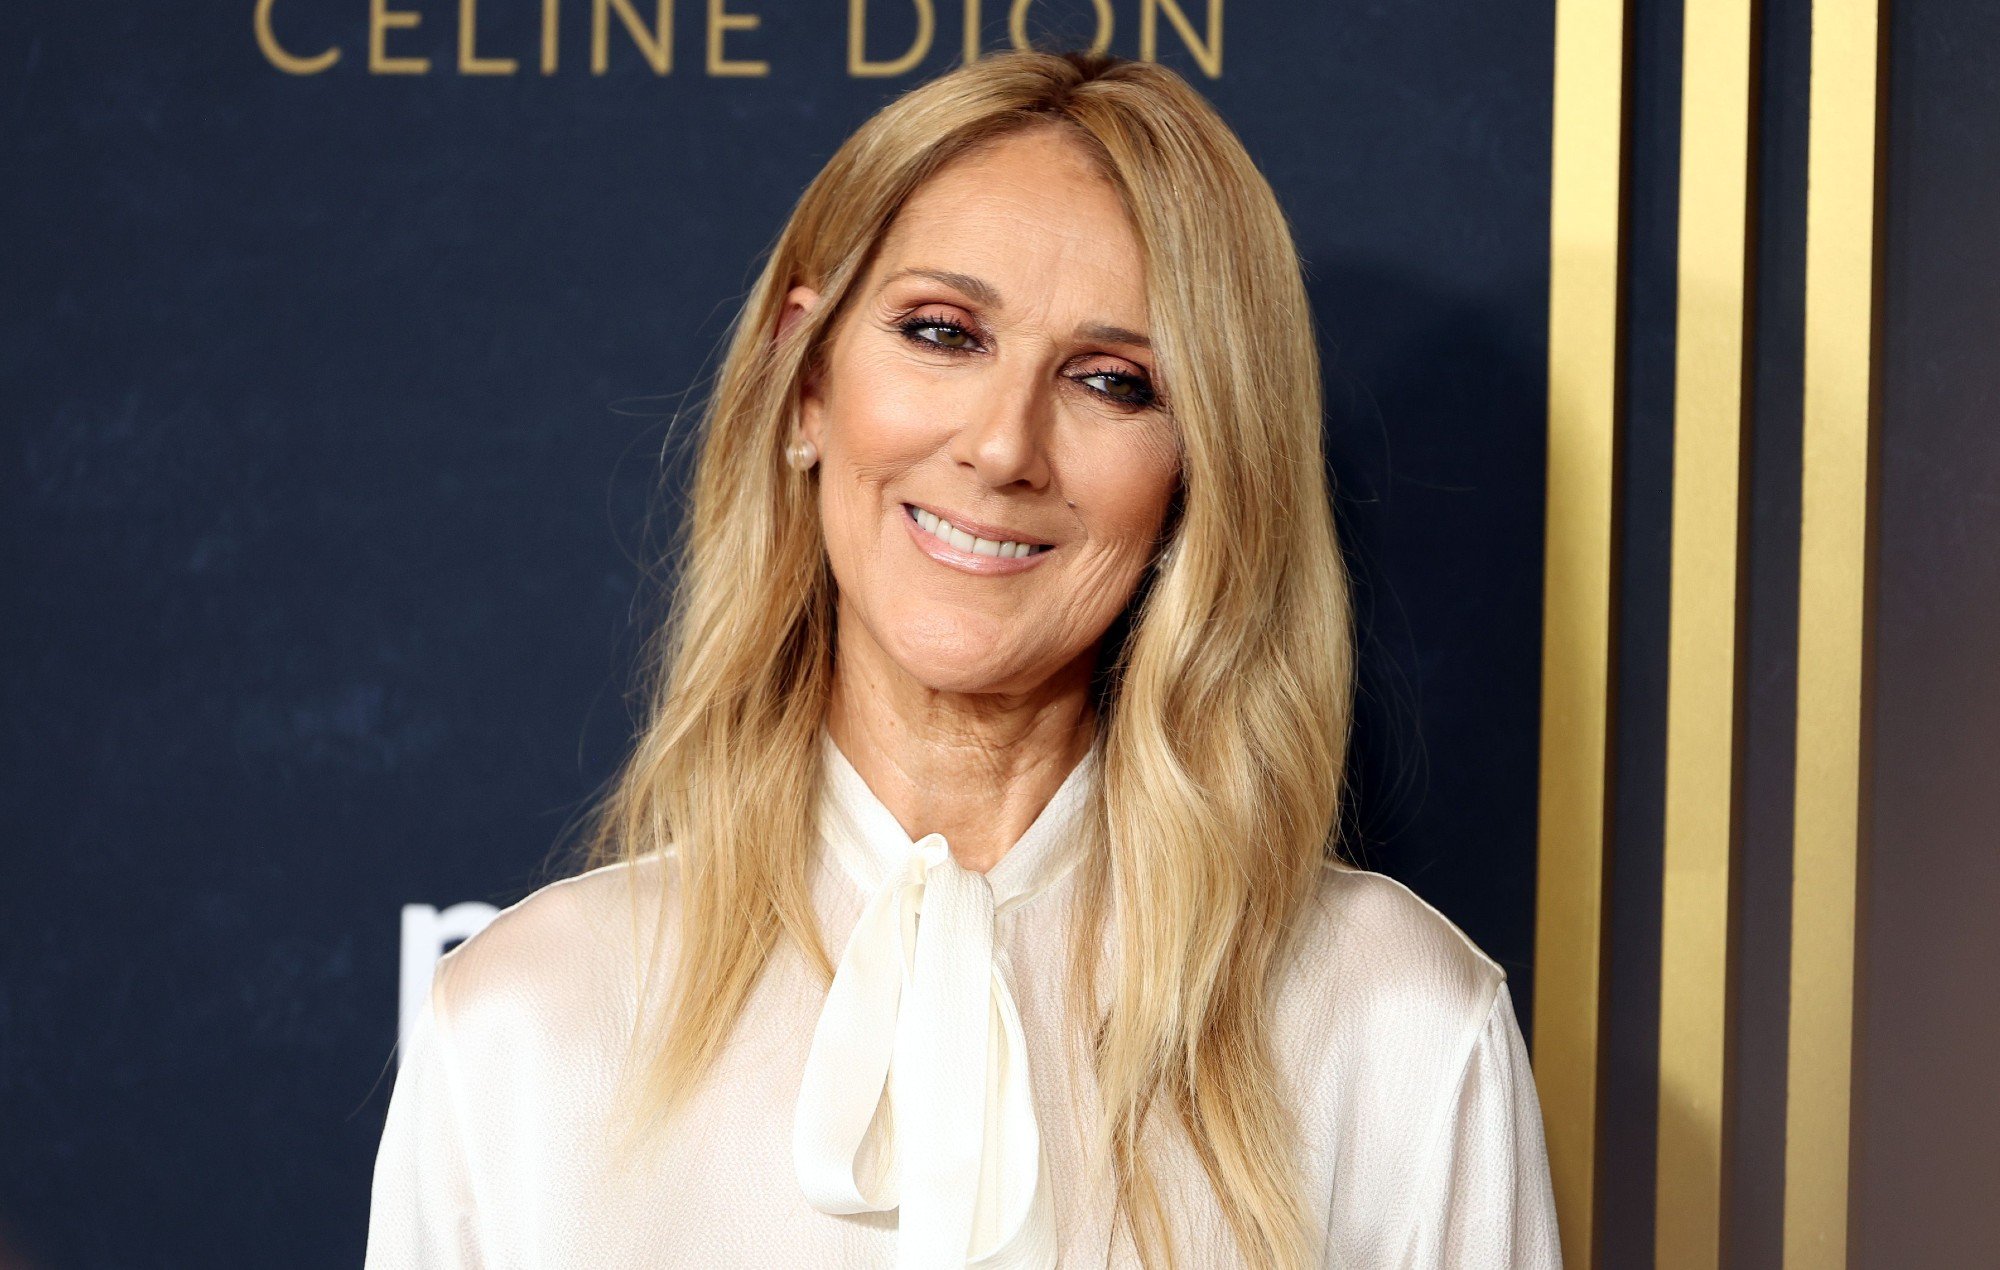 Olympics 2024: Celine Dion rumoured for opening ceremony performance